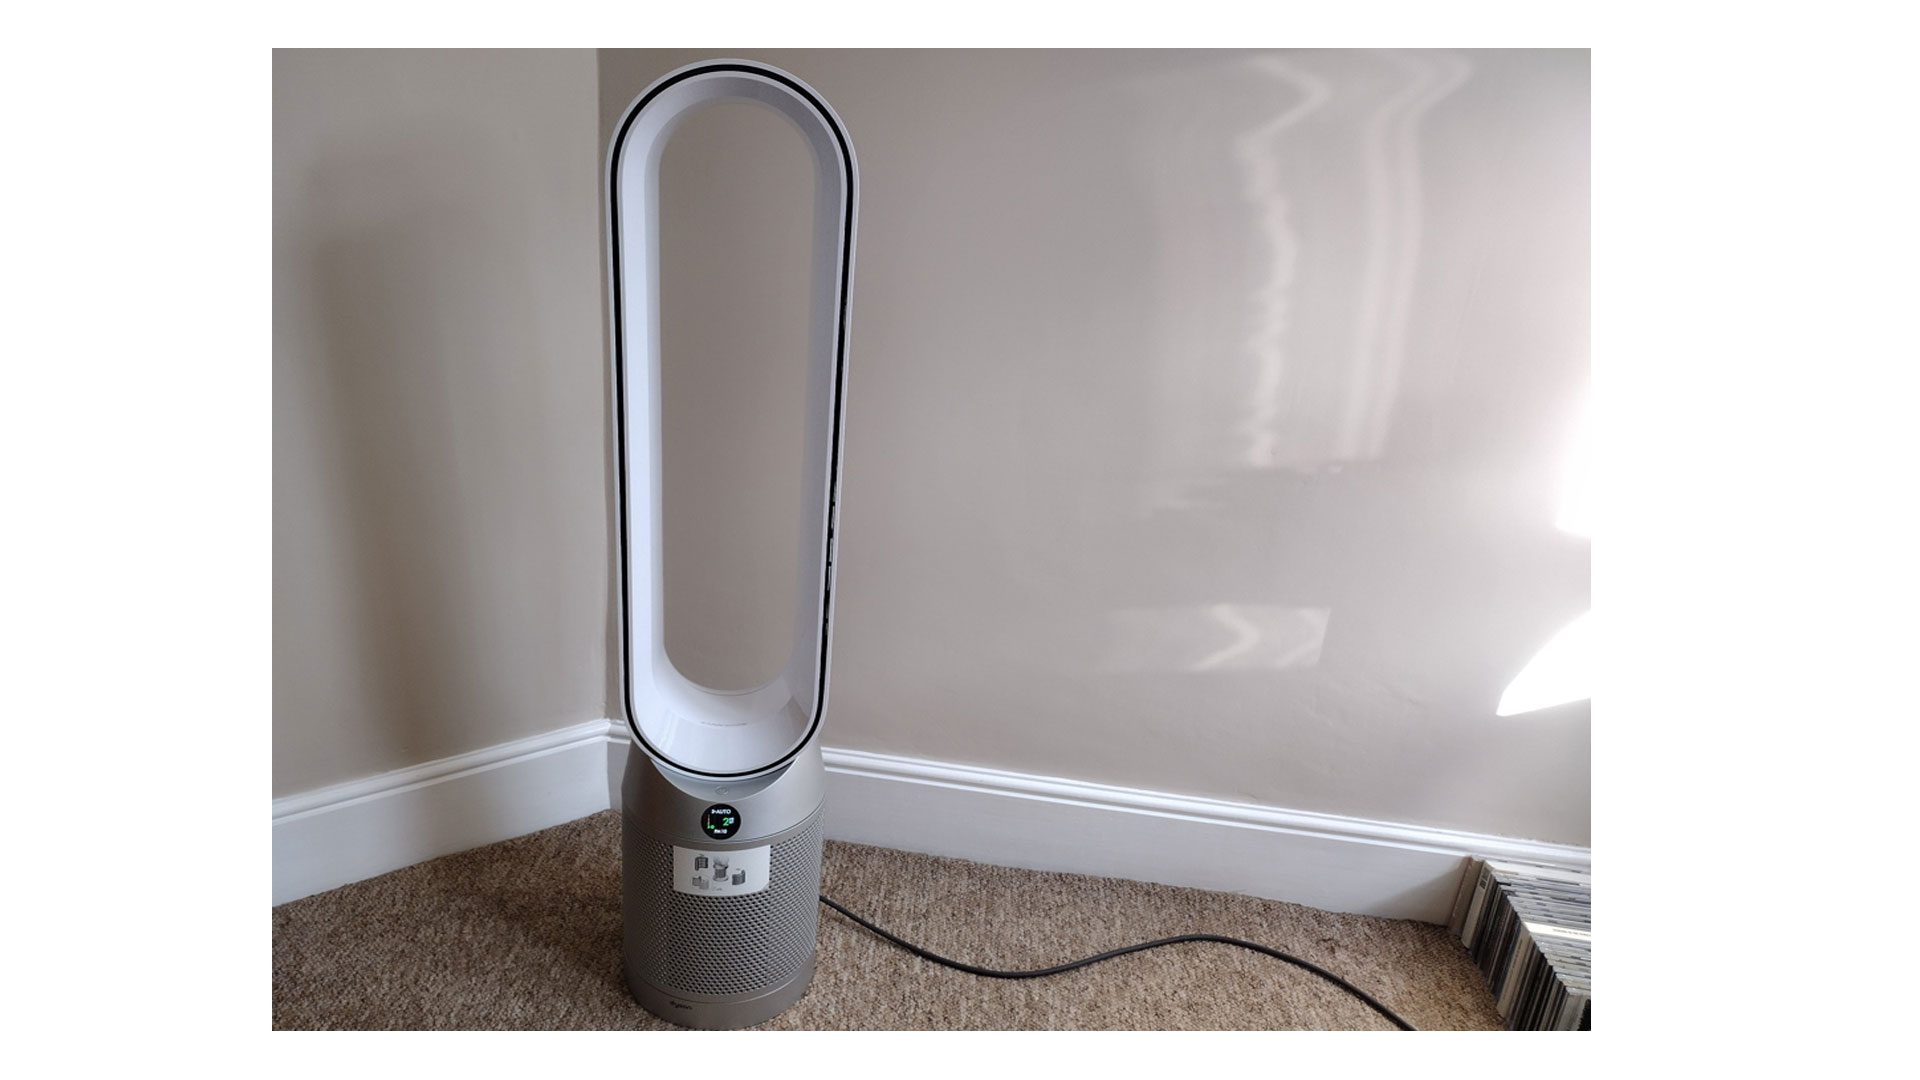 Dyson Purifier Cool: Image shows the full size air purifier with its power cord.